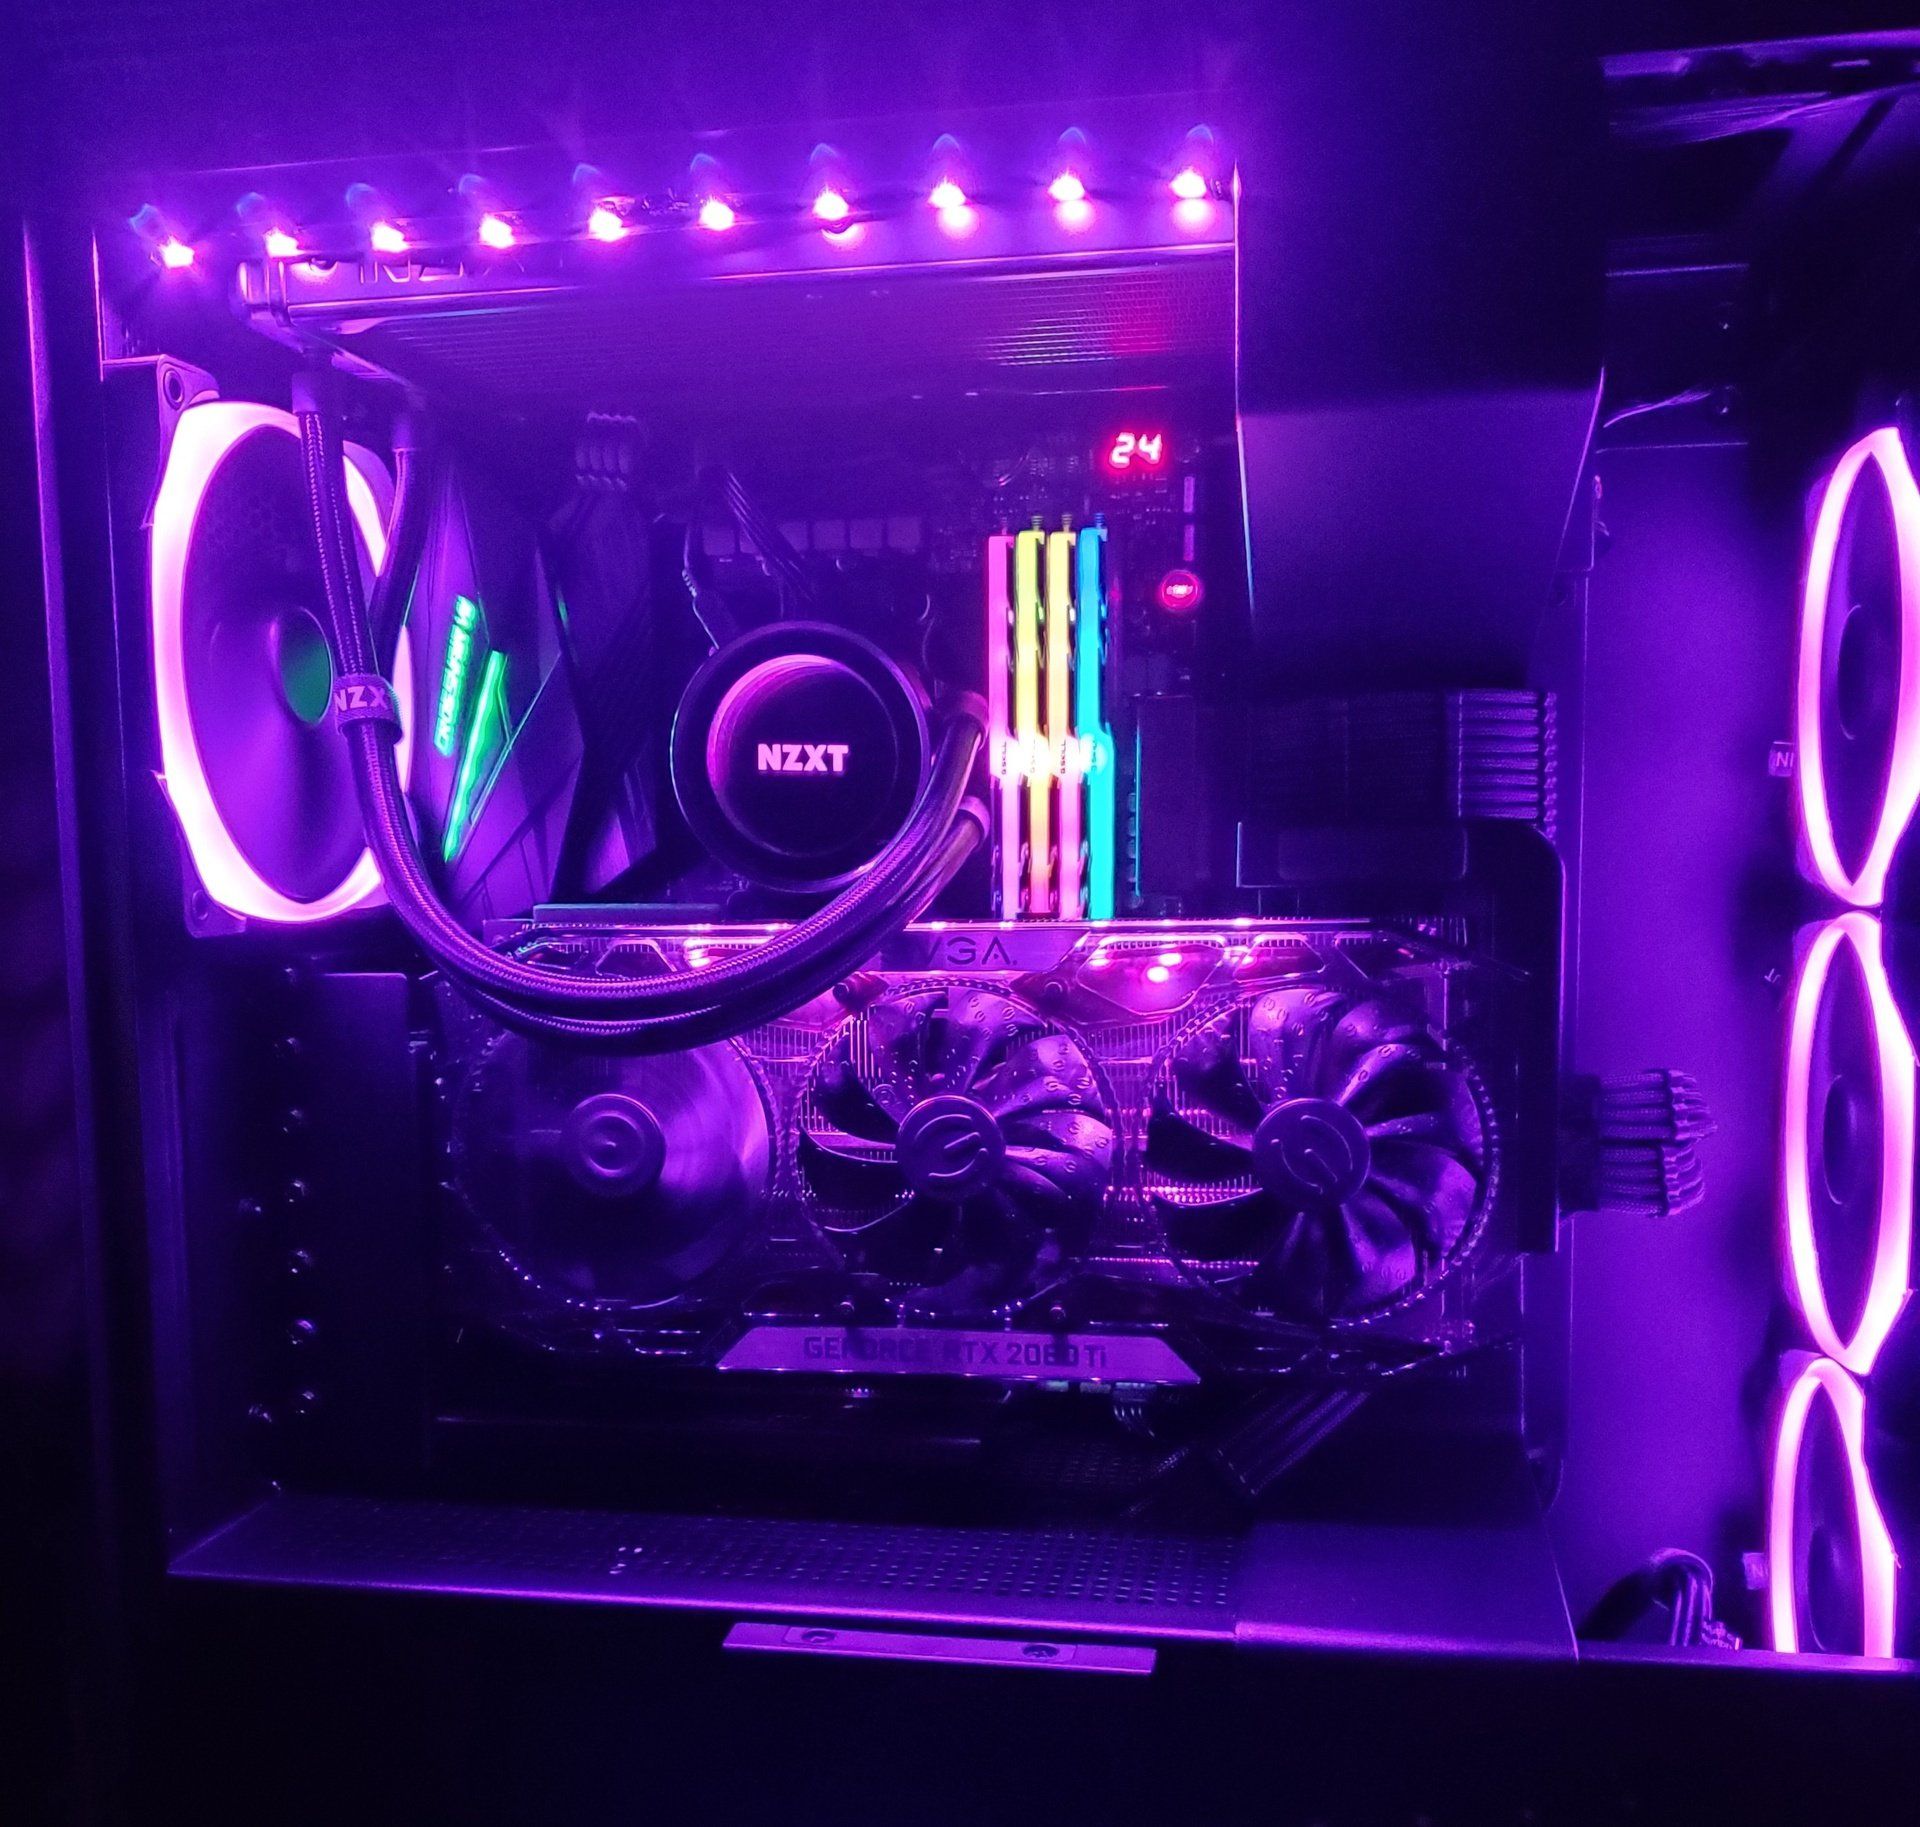 Black Rgb » Builds (View 11 of 20)